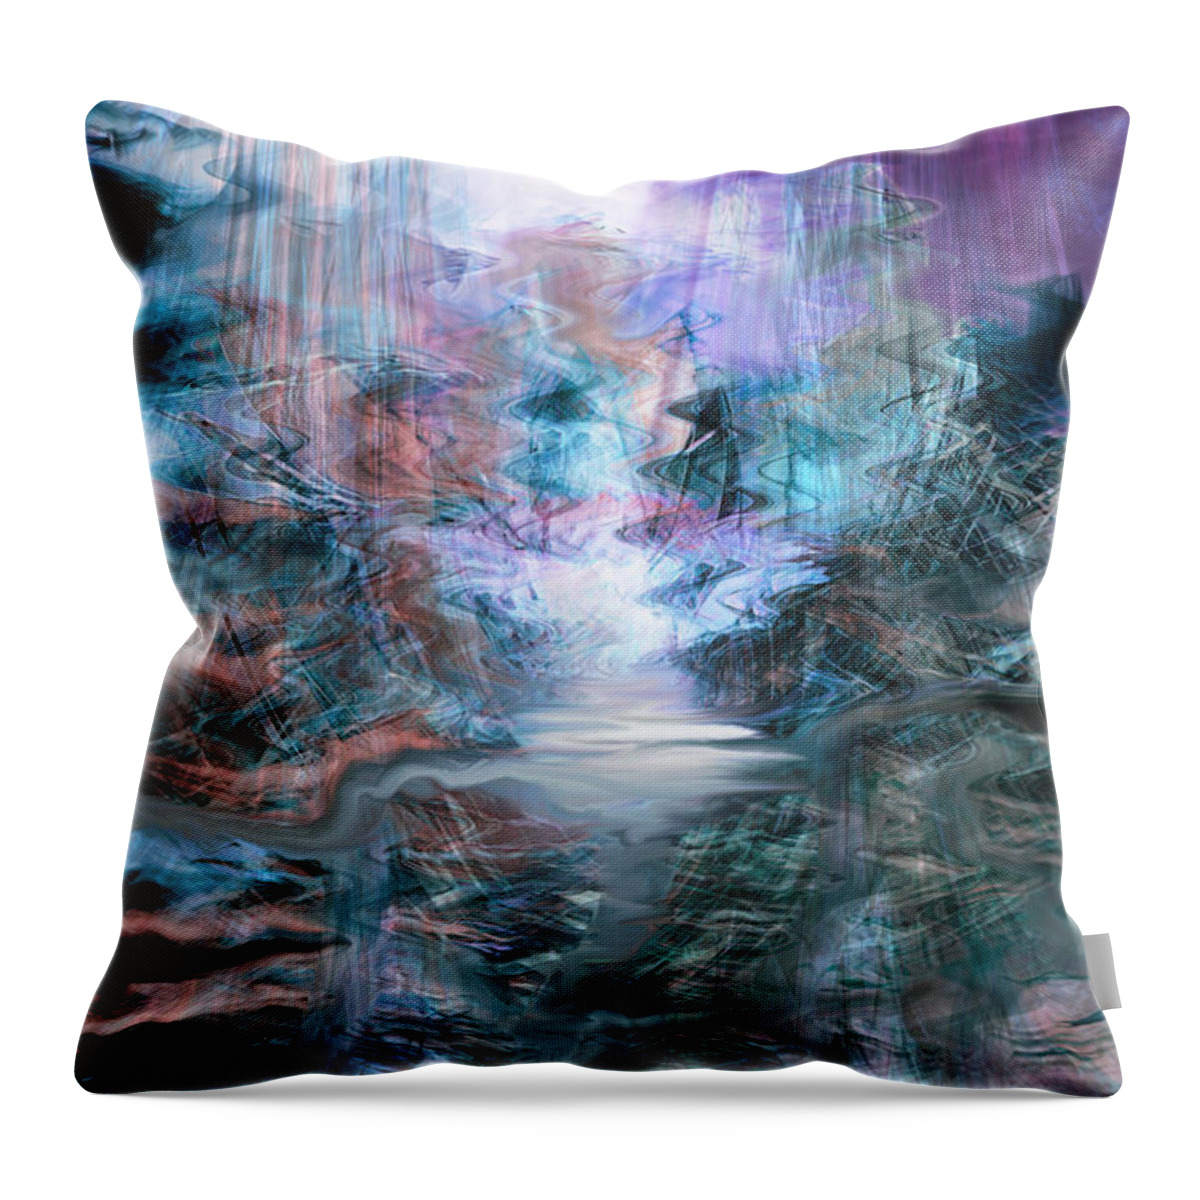 The Road Throw Pillow featuring the digital art The Road by Linda Sannuti